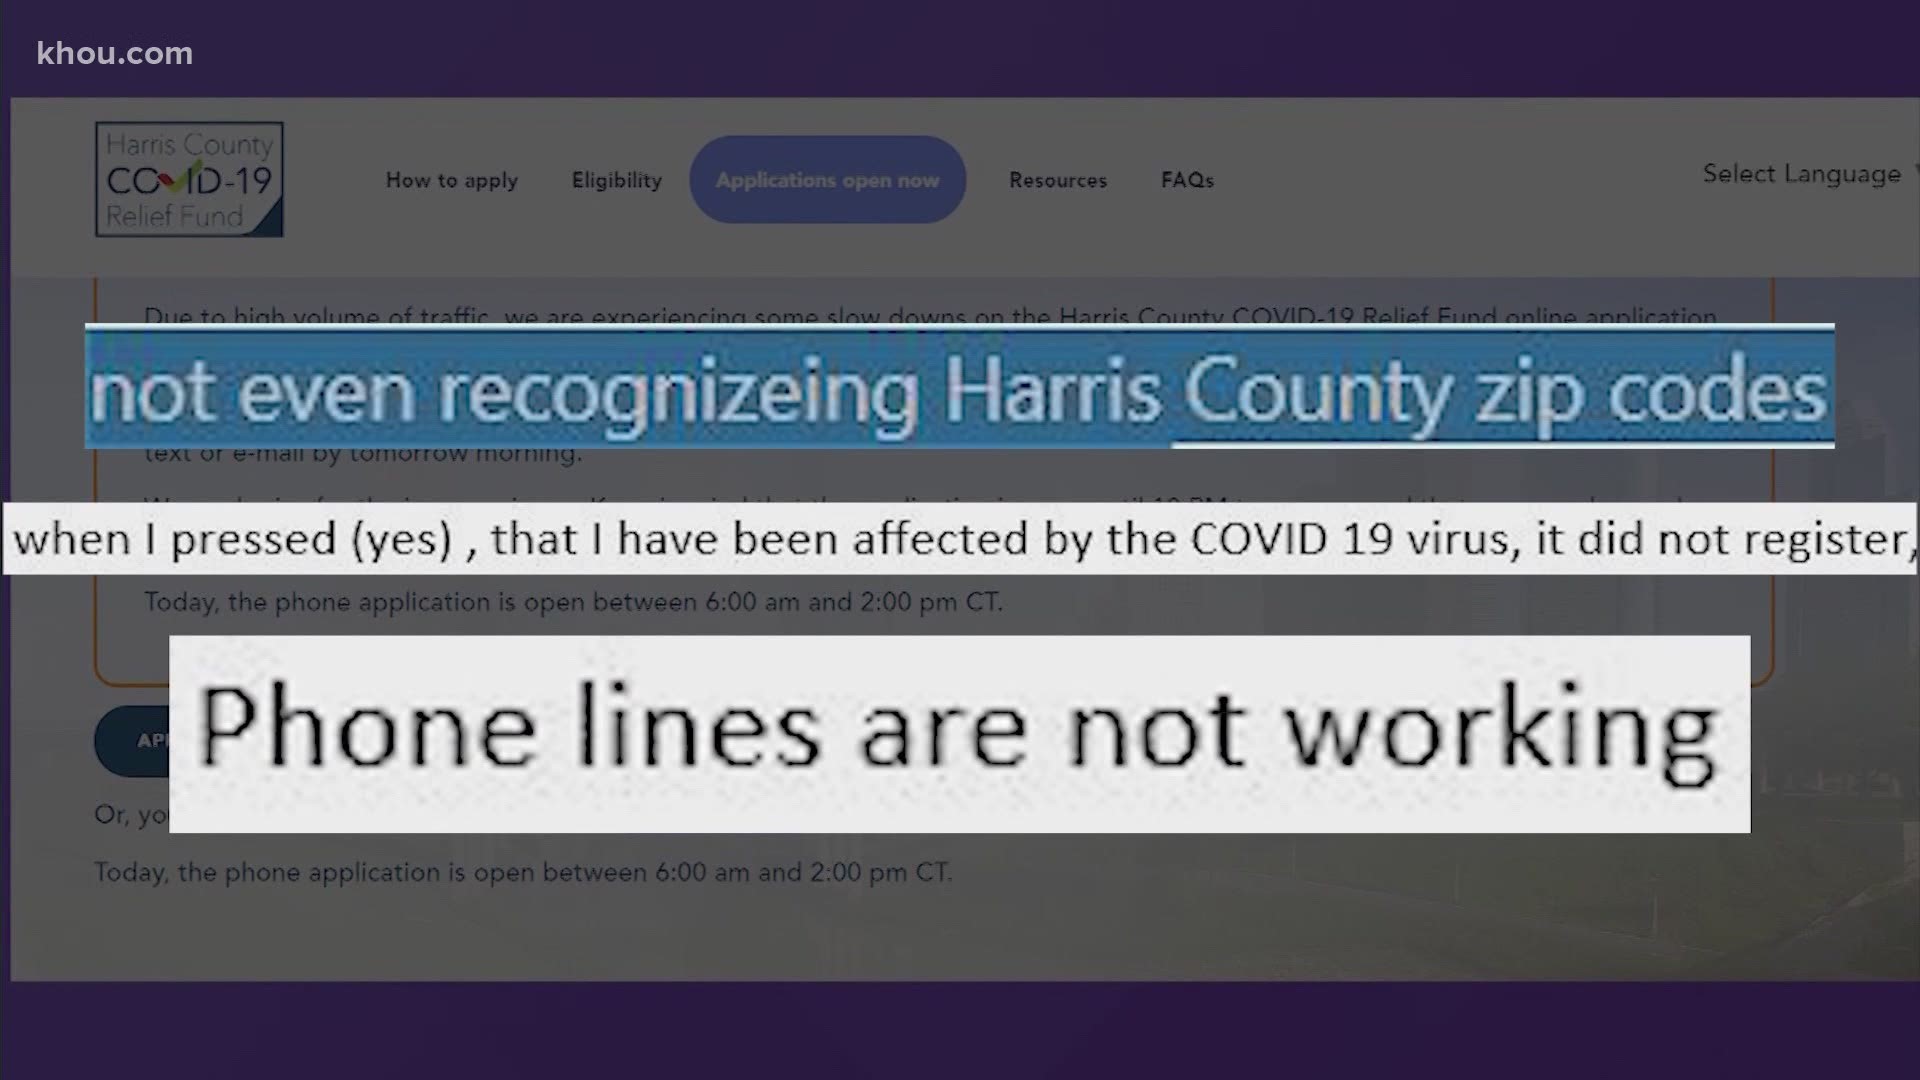 Harris County commissioners have extended call center hours to 4 p.m. Tuesday for those who were unable to apply.